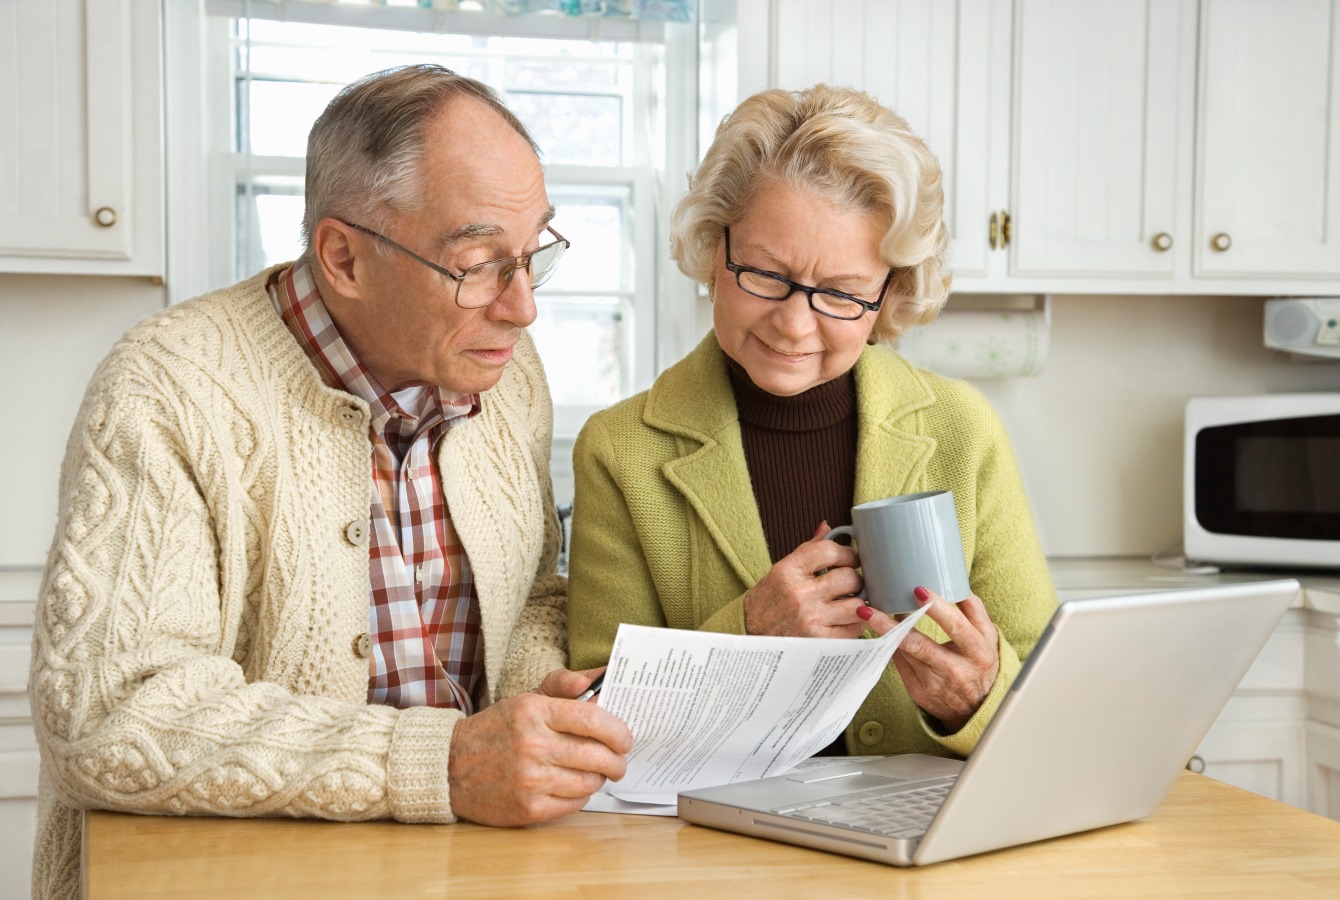 And older white couple look over a document in front of a laptop computer ona kitchen counter.